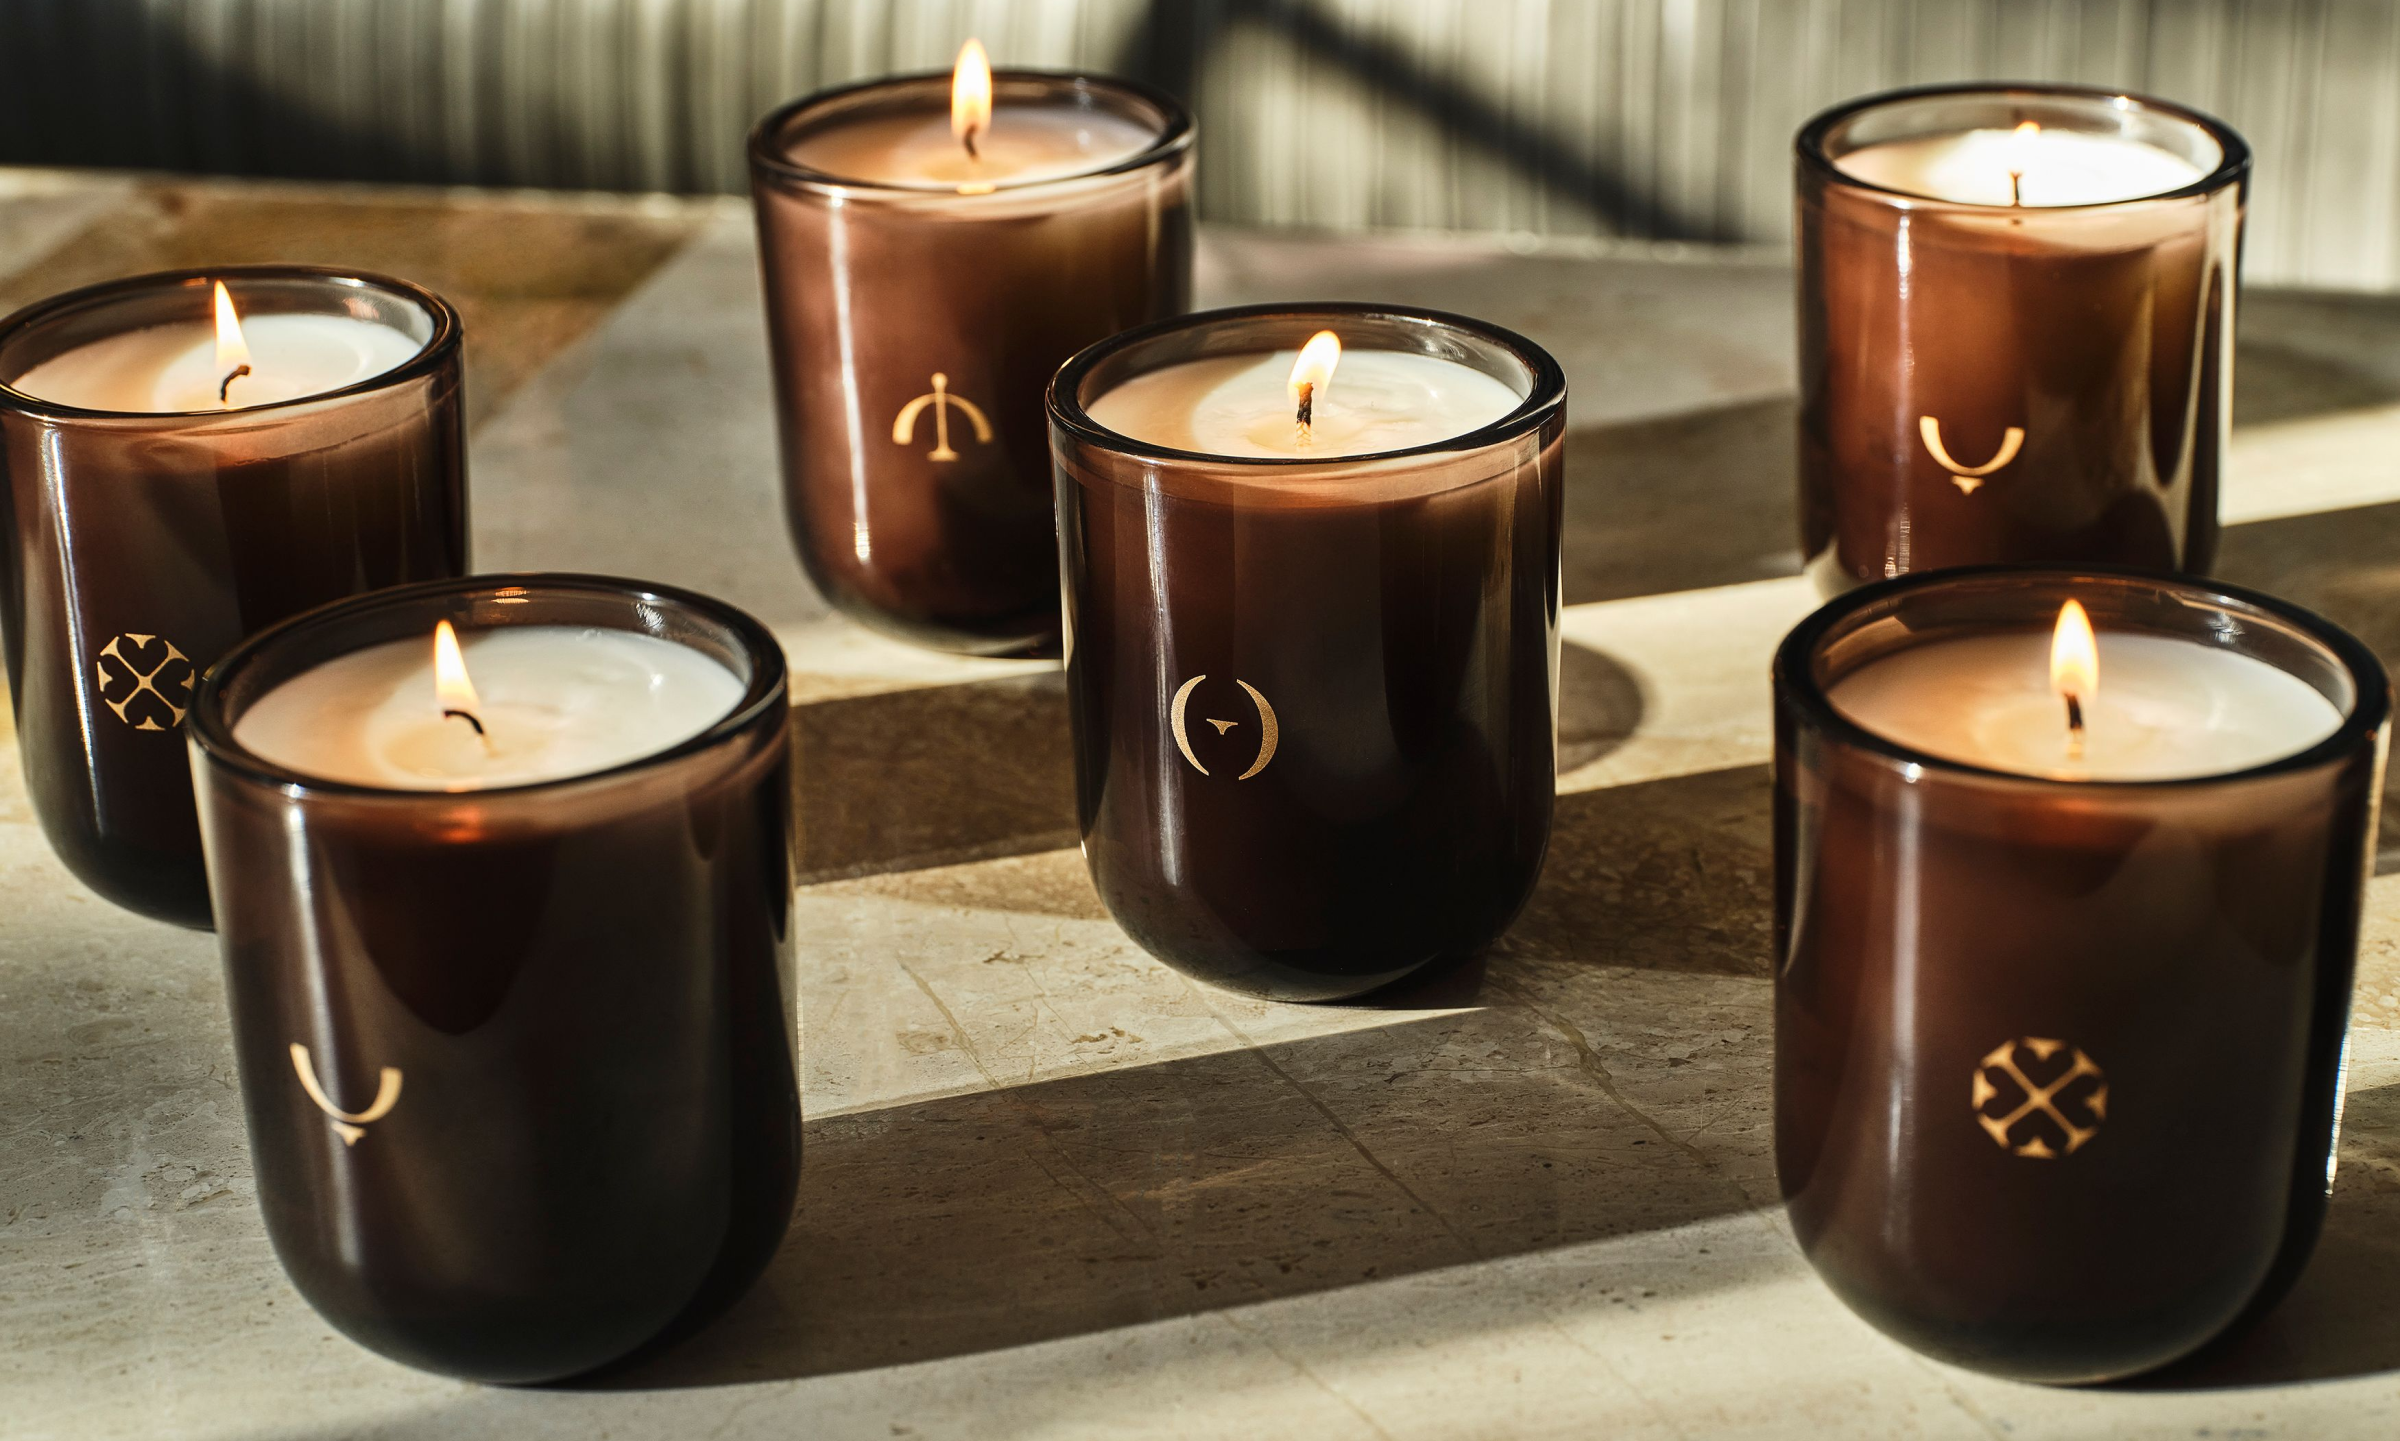 6 lit candles in brown glass tumblers with gold seasonal symbols